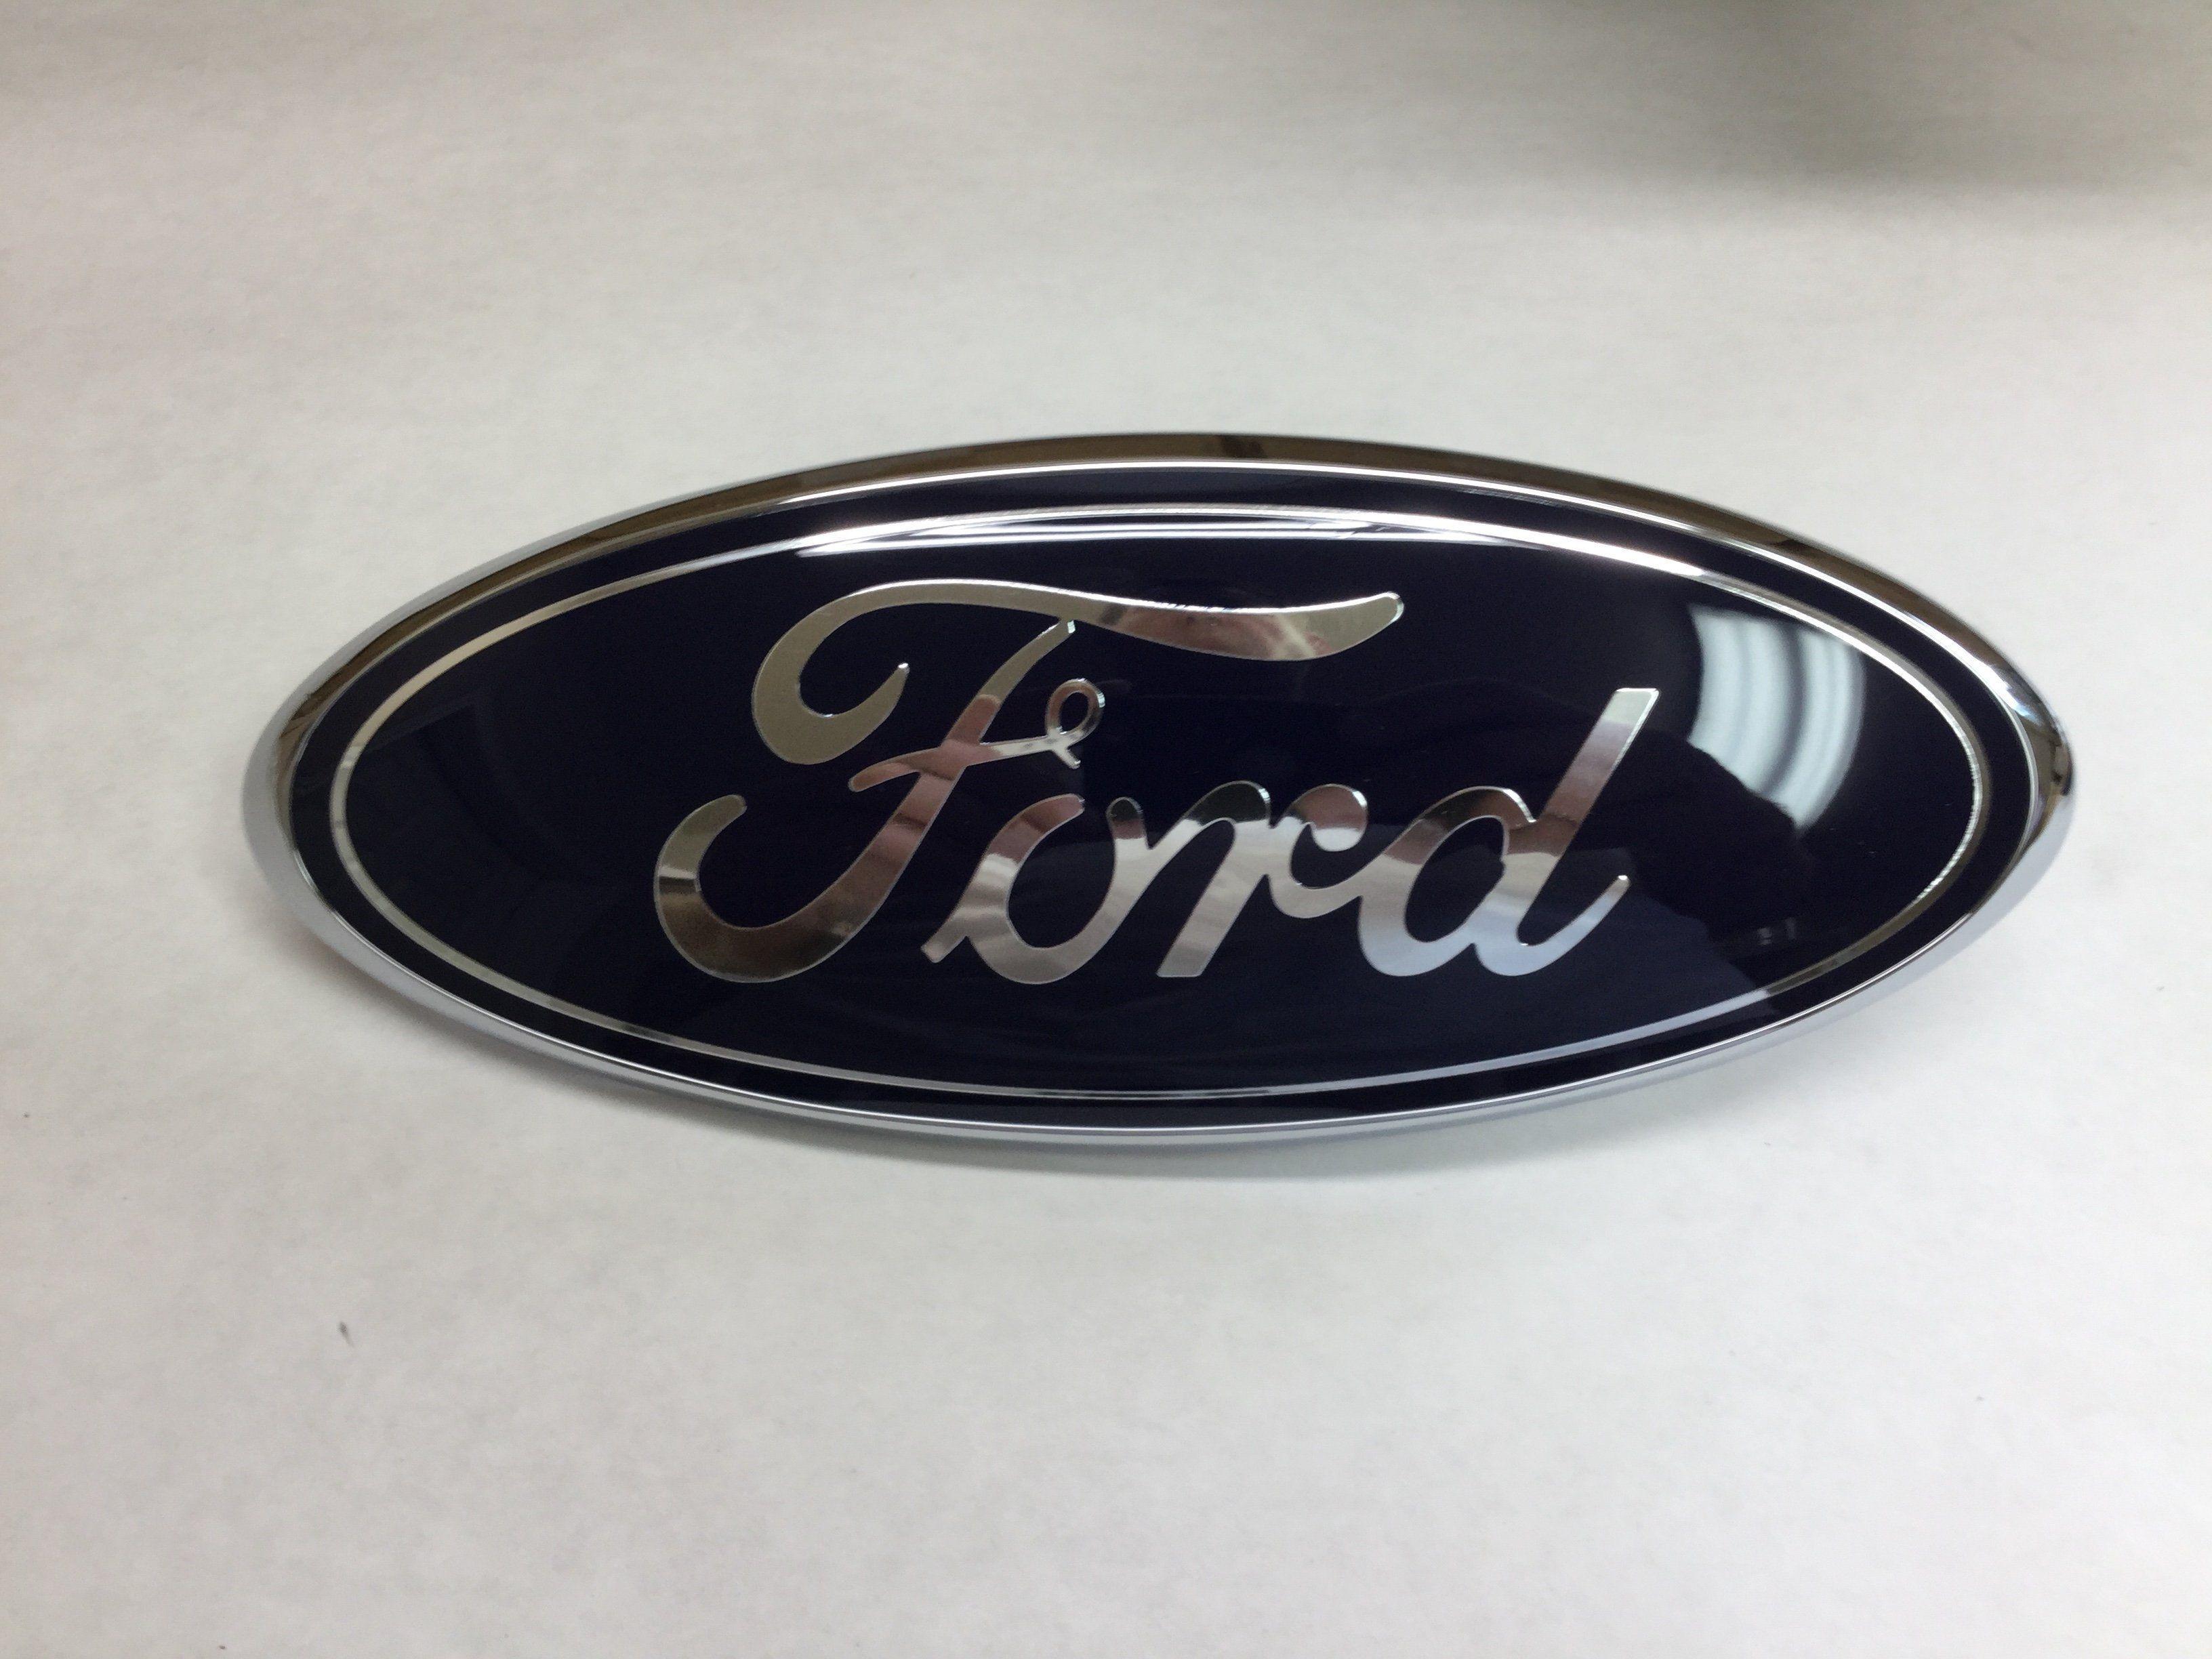 F-350 Logo - New 2005 2007 Ford F 250 F 350 Super Duty Grille Emblem Blue Oval Genuine Part Number 5C3Z 8213 AB B32 Lowest Prices, Fast Shipping And 3 Year